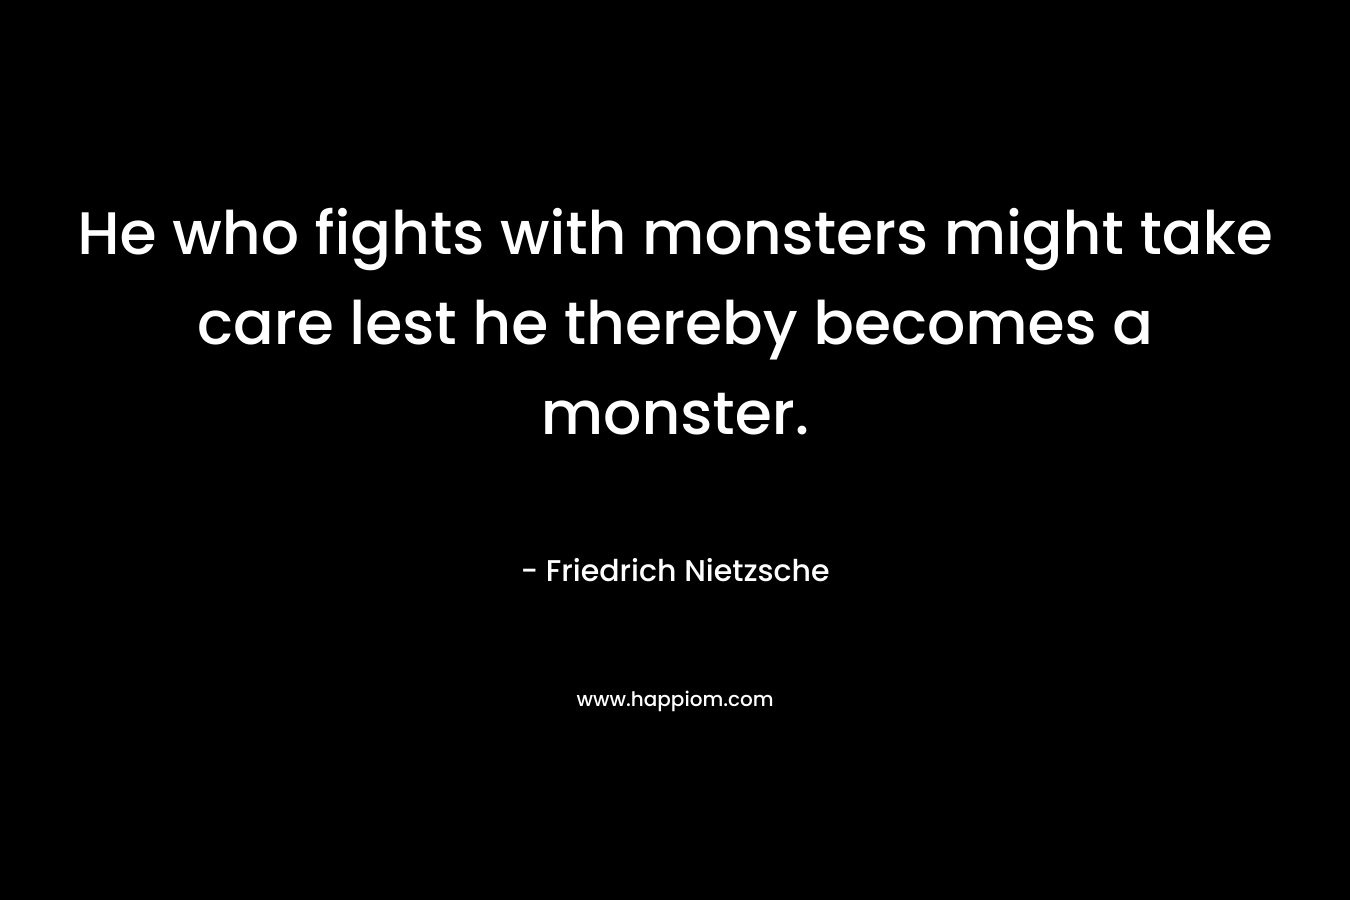 He who fights with monsters might take care lest he thereby becomes a monster. – Friedrich Nietzsche